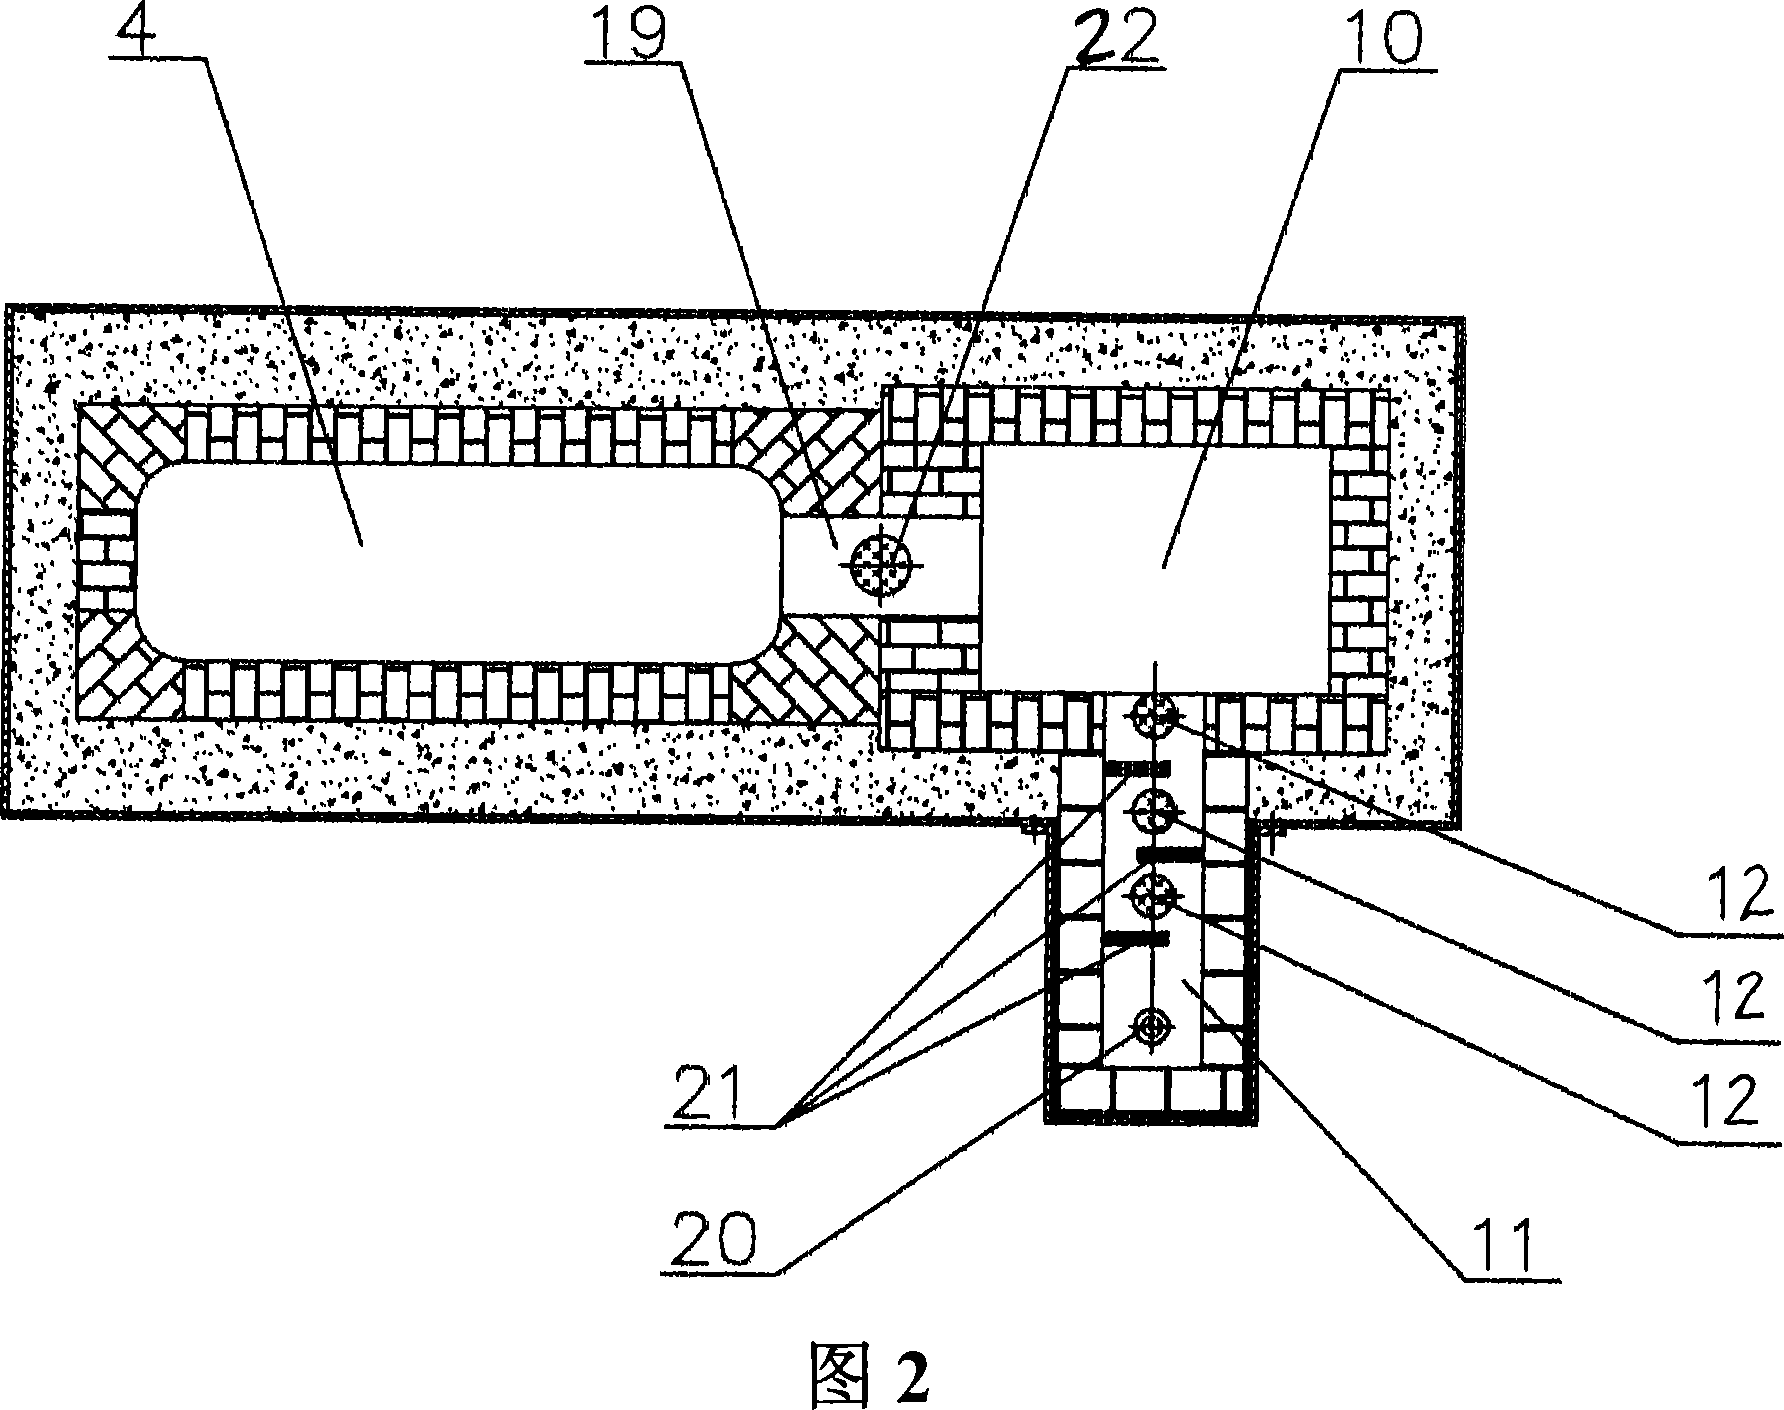 Furnace for converting and casting oxygen-free copper ingot